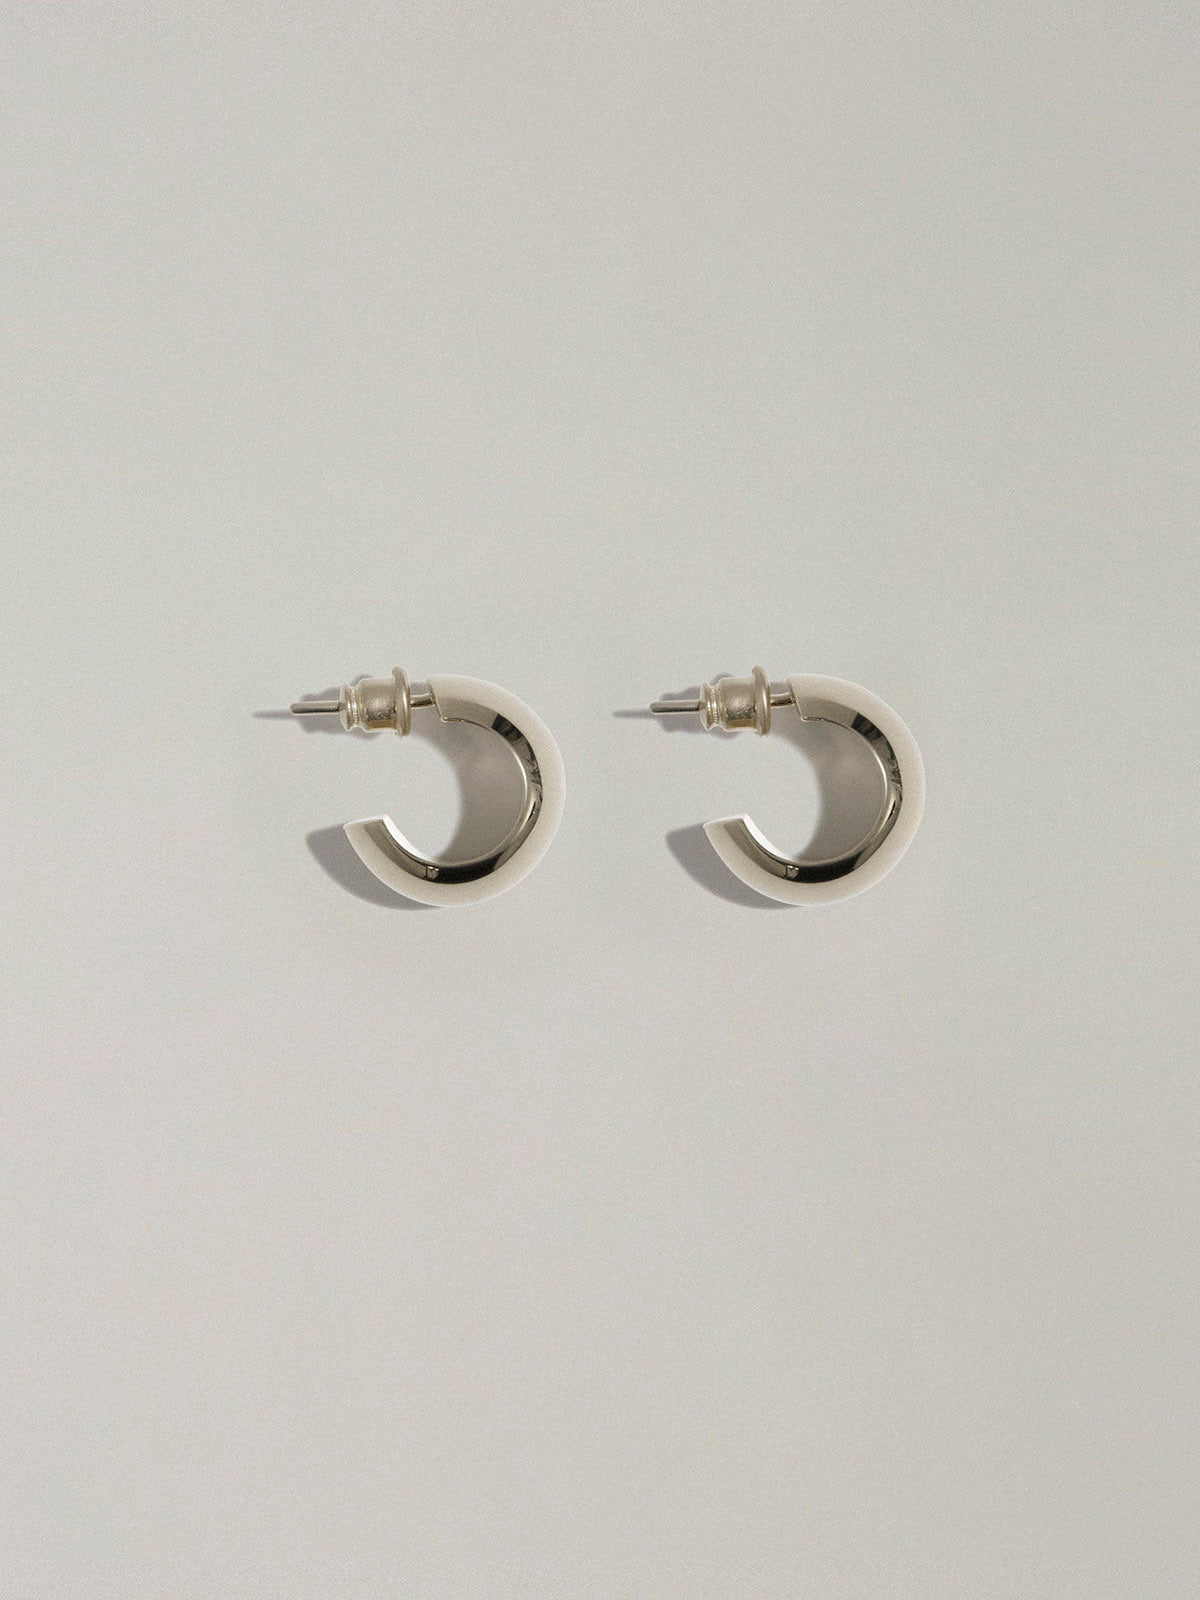 Small bold hoops in silver